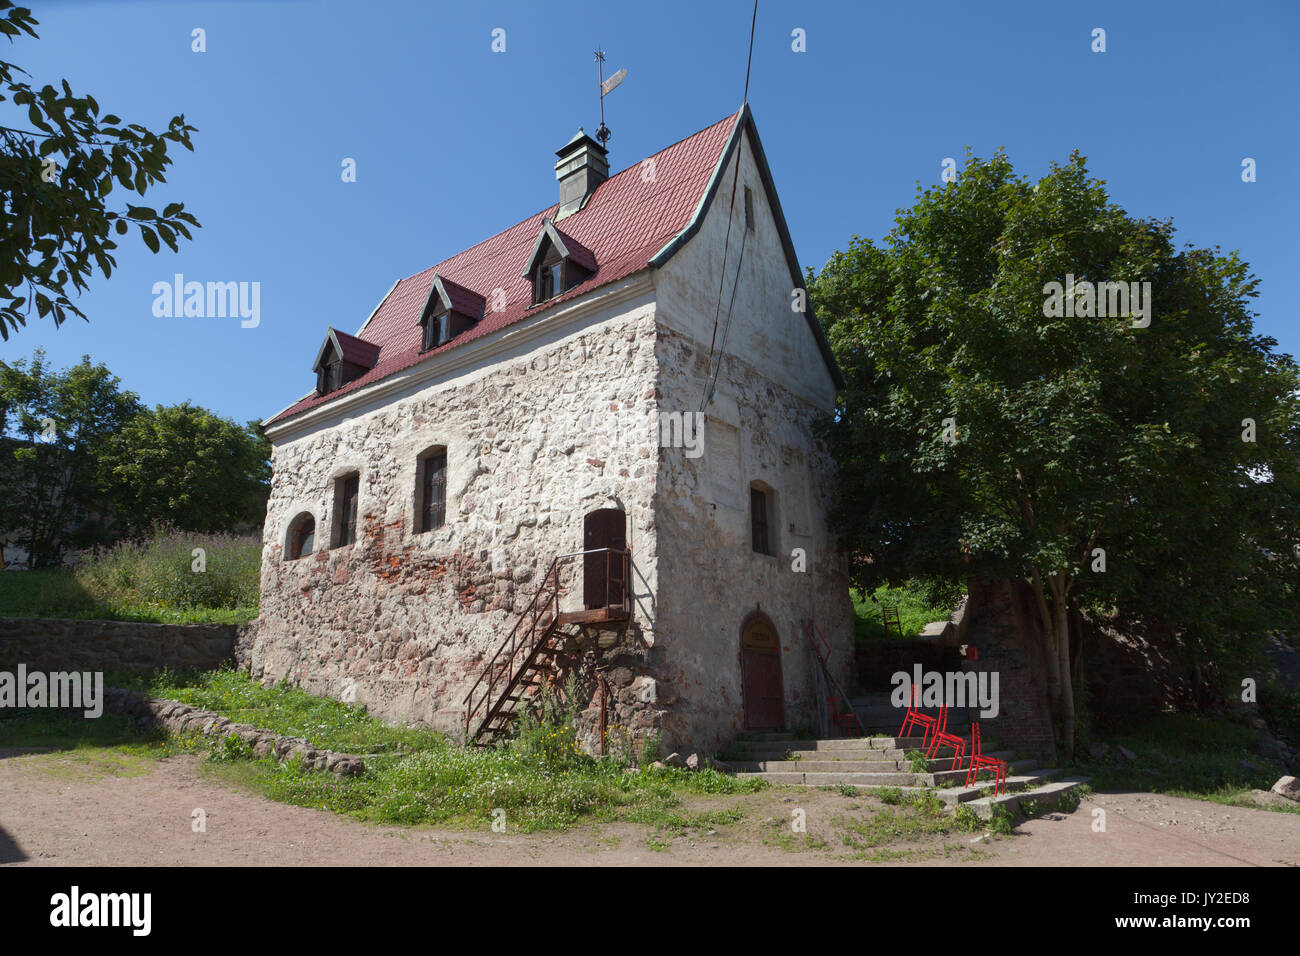 The house of the townspeople, Vyborg, Leningrad Oblast, Russia. Stock Photo